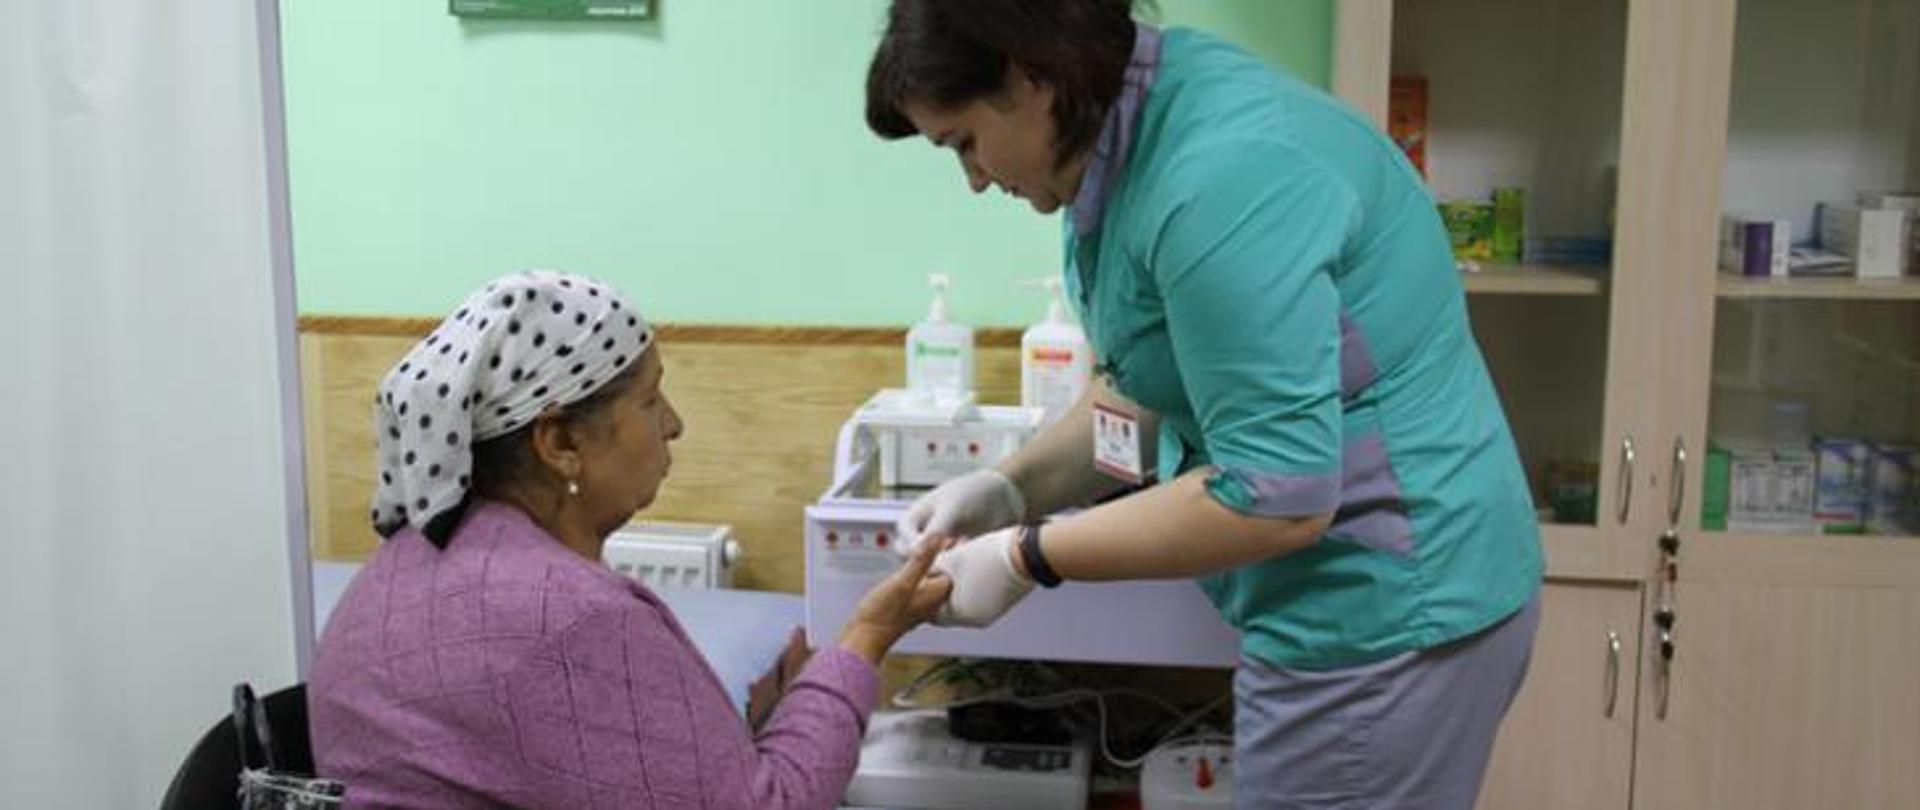 Running four medical and social clinics in eastern Ukraine